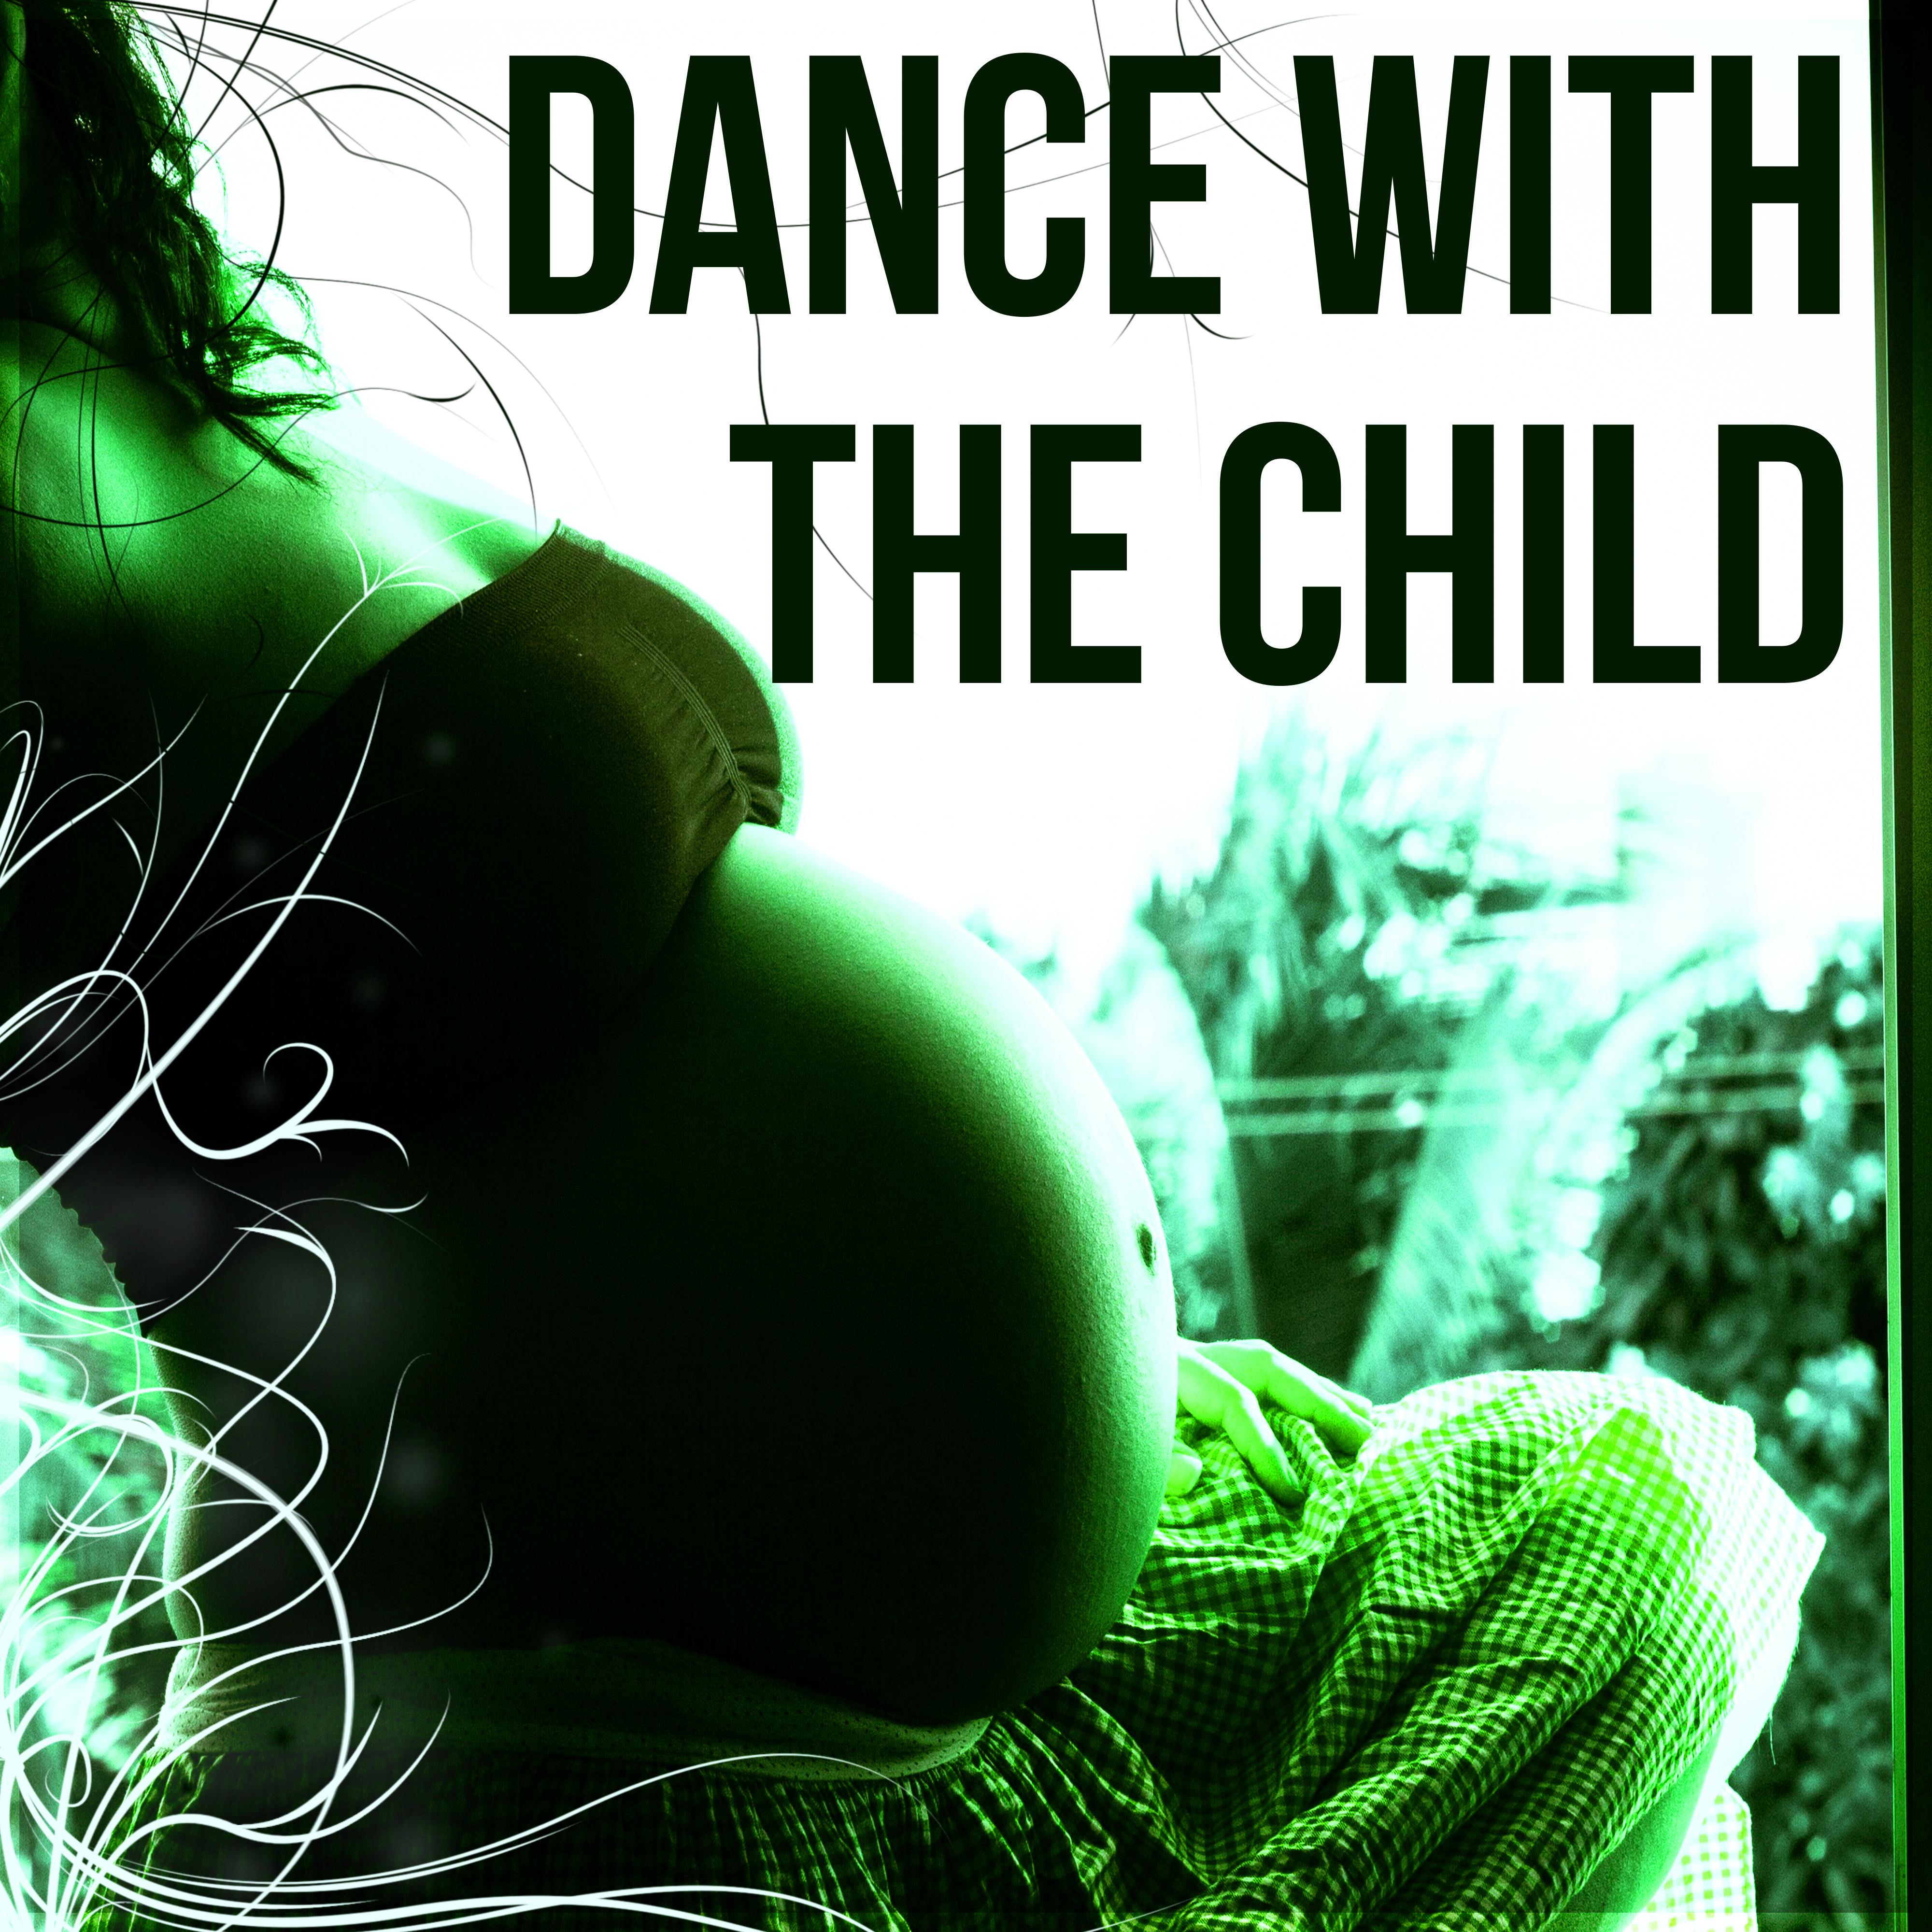 Dance with the Child - Pregnancy Calming Relaxation Meditation Music, Nature Sounds, Soothing Calm Music for Pregnant Women